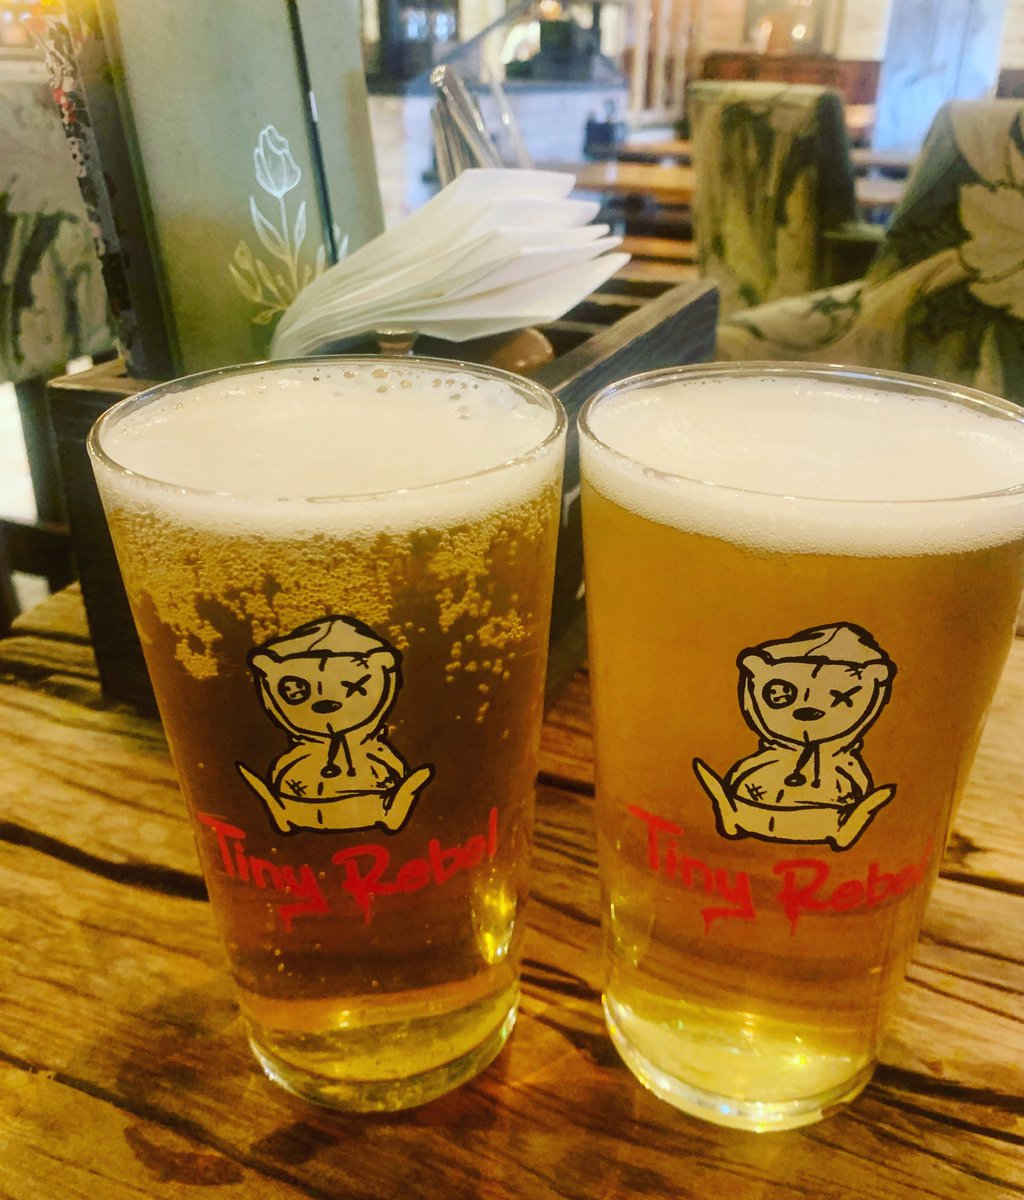 An outstanding Sunday afternoon, beginning with running into a small dog of my acquaintance hiding under a dog treats stall at @_makersmarket having stolen a chicken’s foot, and ending with finding a @thebotanistuk bear hunt token for a free pint of @tinyrebelbrewco beer. 🐕🍺